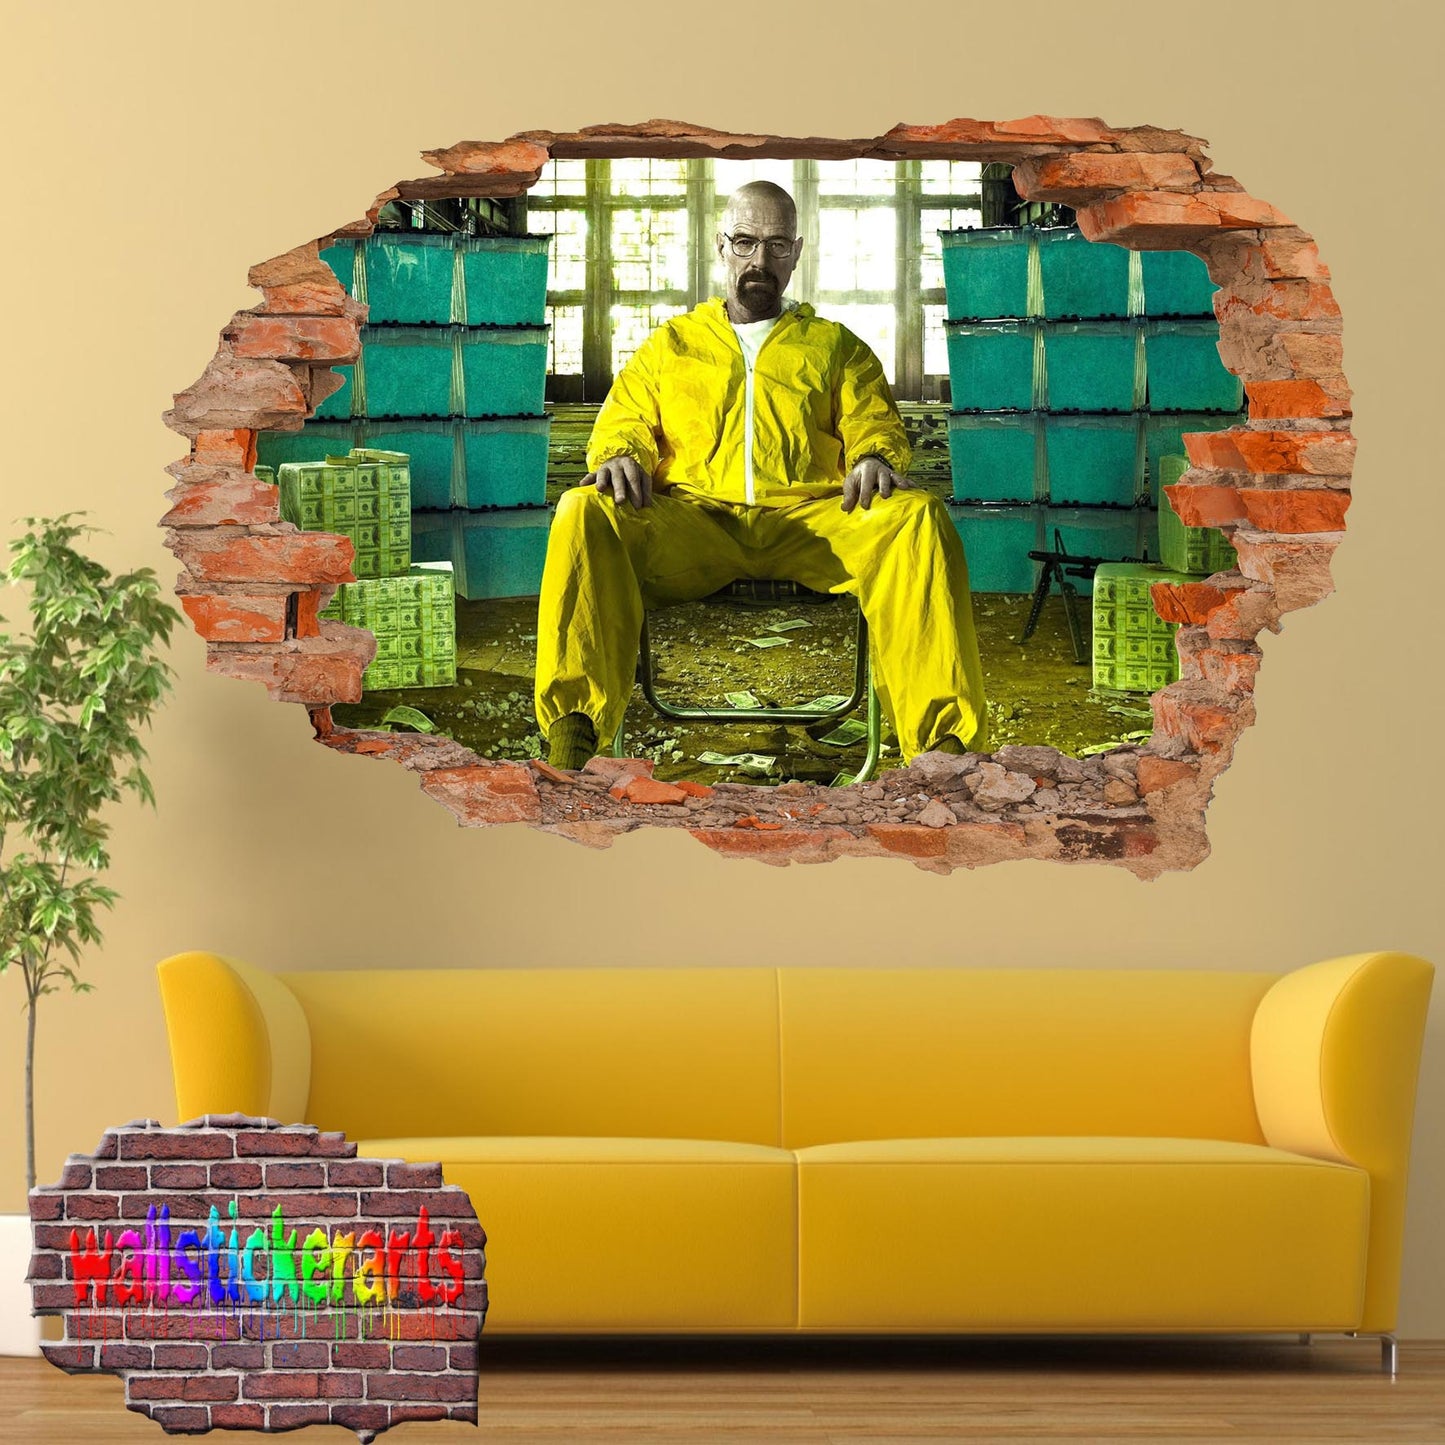 breaking bad walter white wall sticker poster mural decal